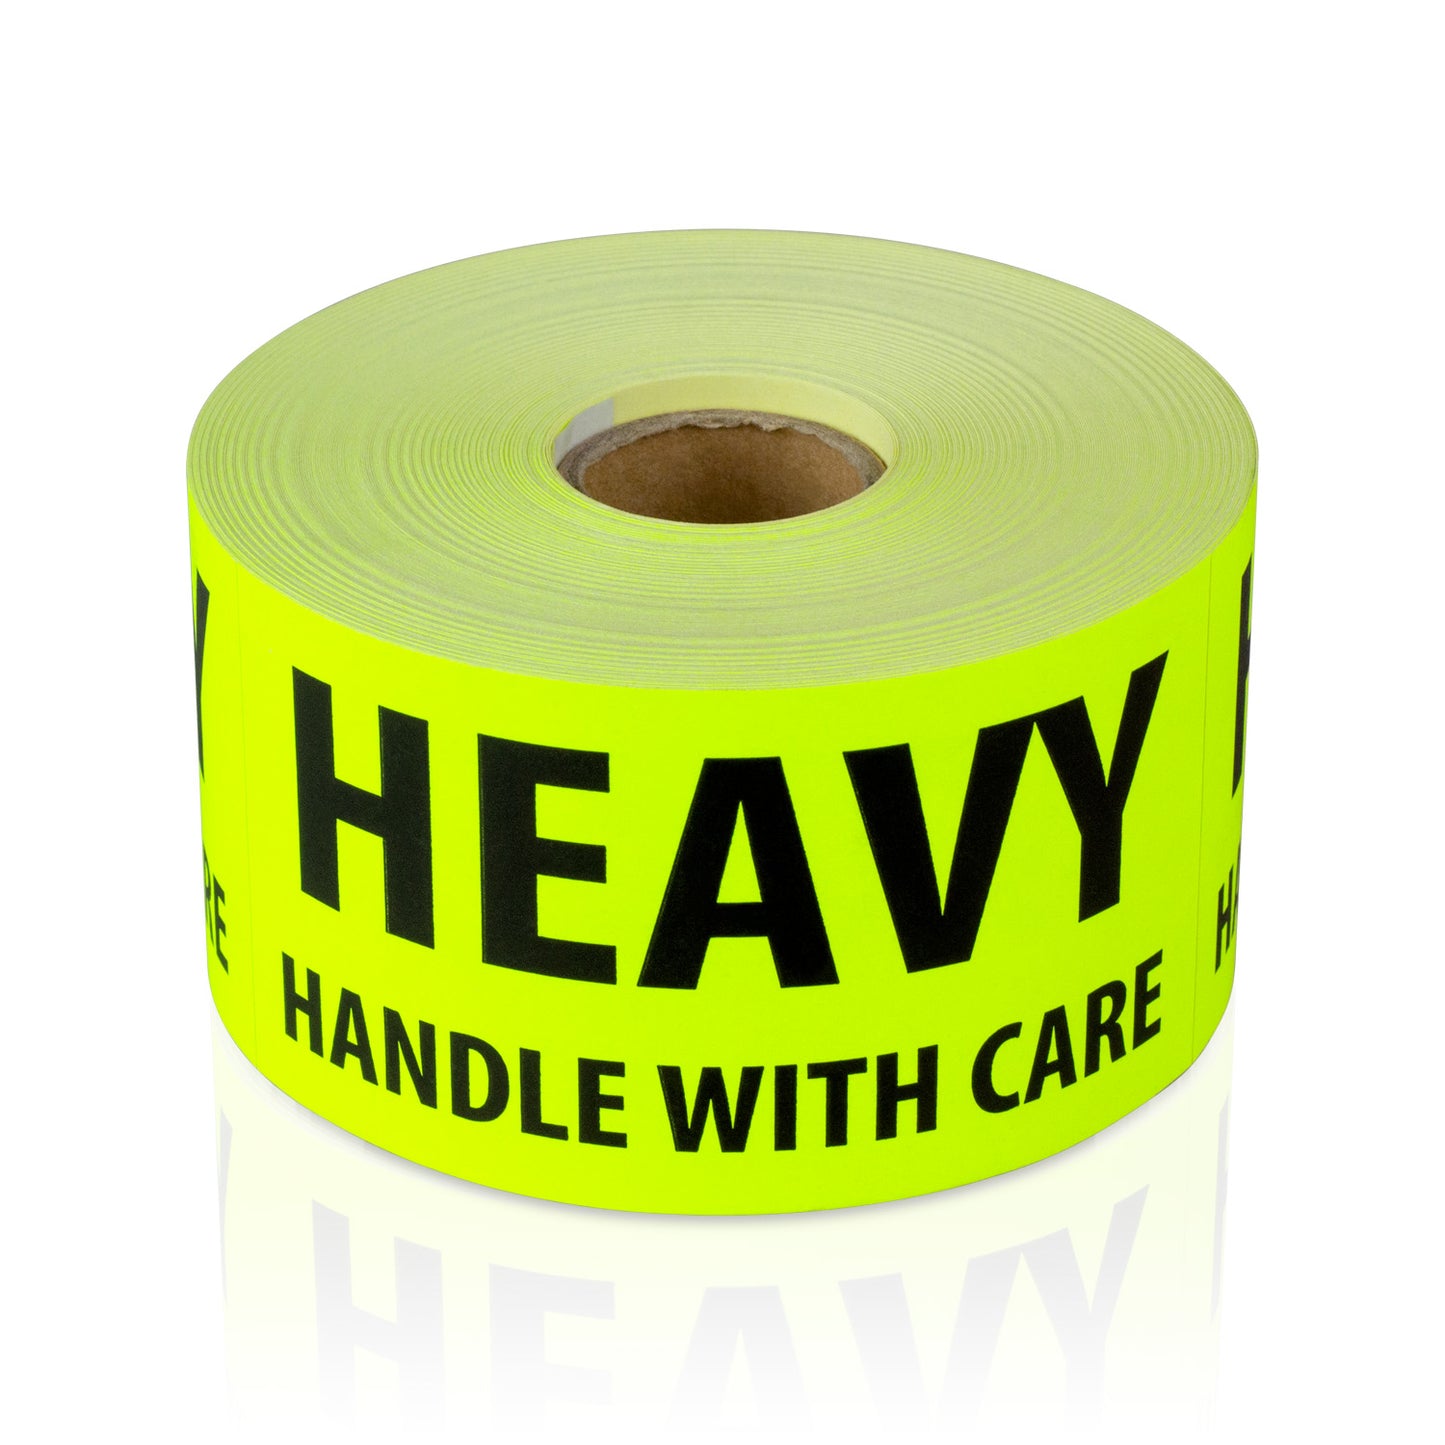 4 x 2 inch | Shipping & Handling: Heavy, Handle with Care Stickers